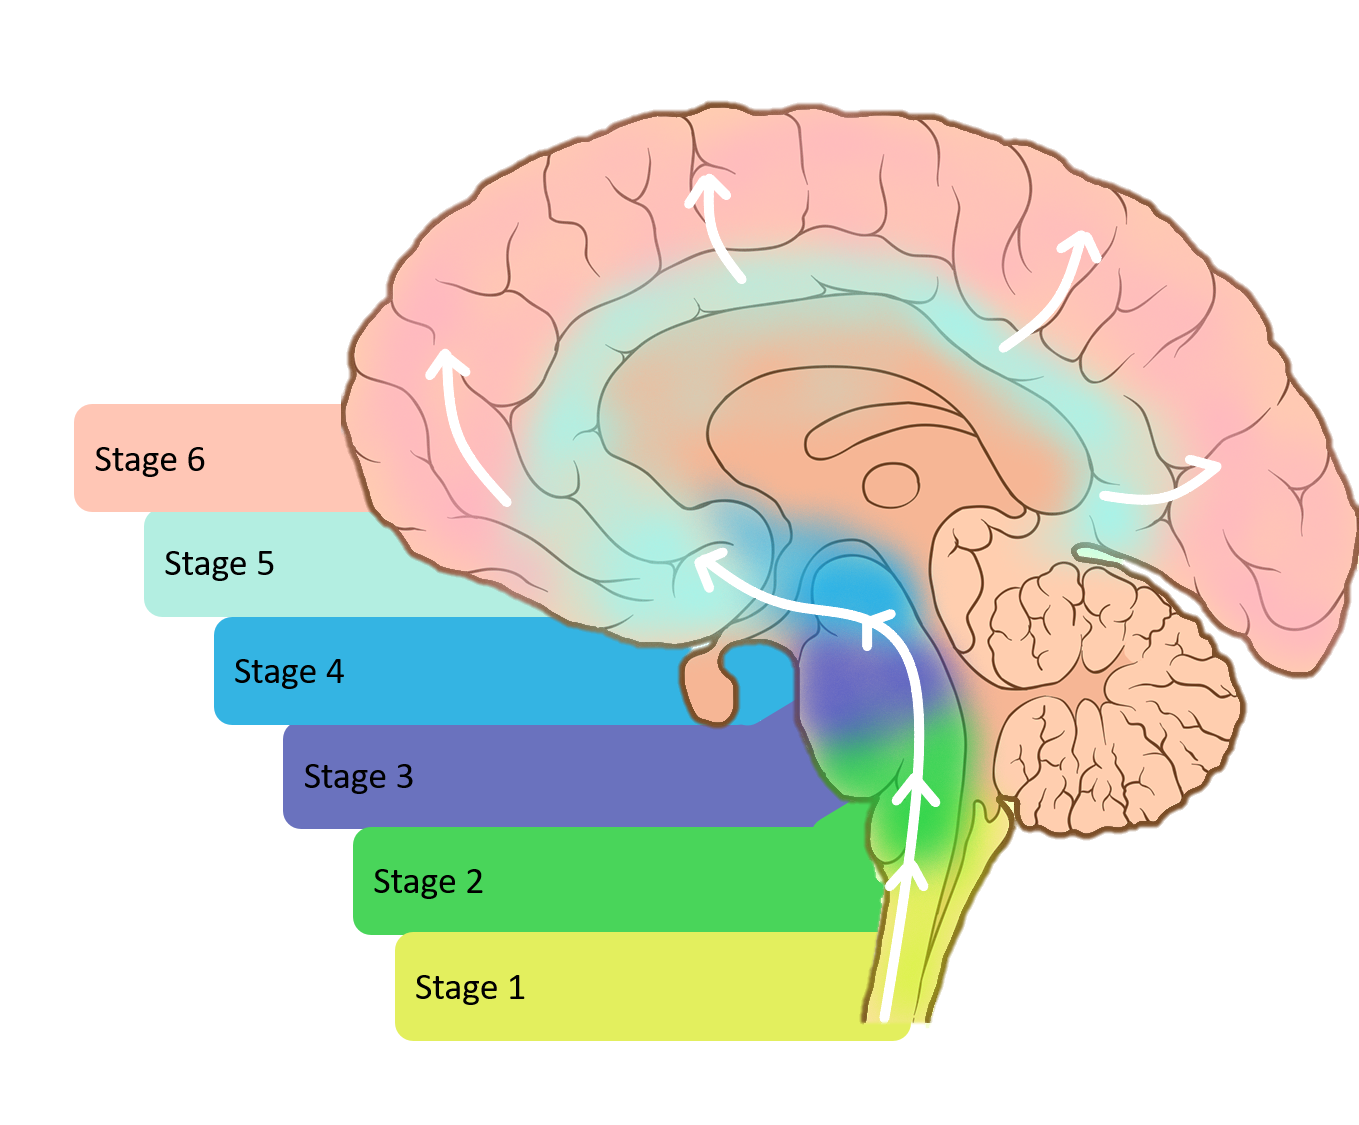 What brain areas are affected by Parkinsons?